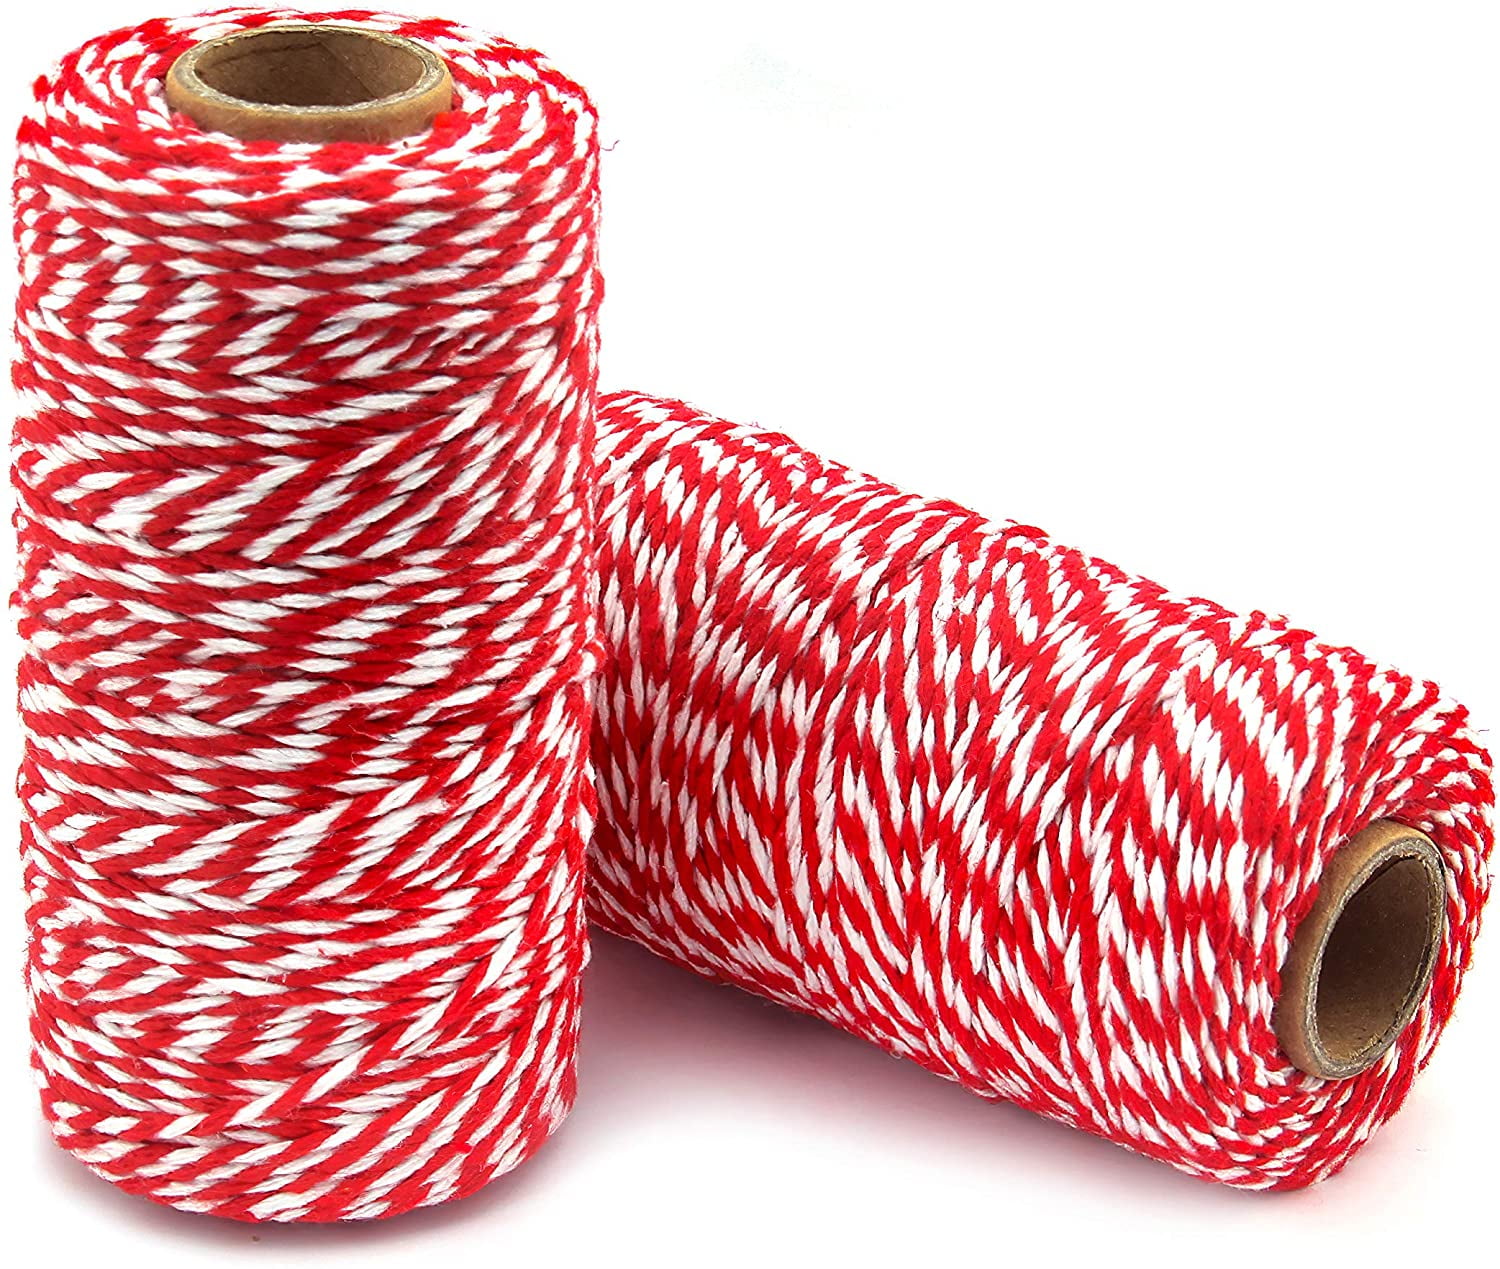 Butchers Craft Cotton Thread Durable Twine Perfect for Baking DIY Crafts and Handmade Arts 200M Red String Twine Red